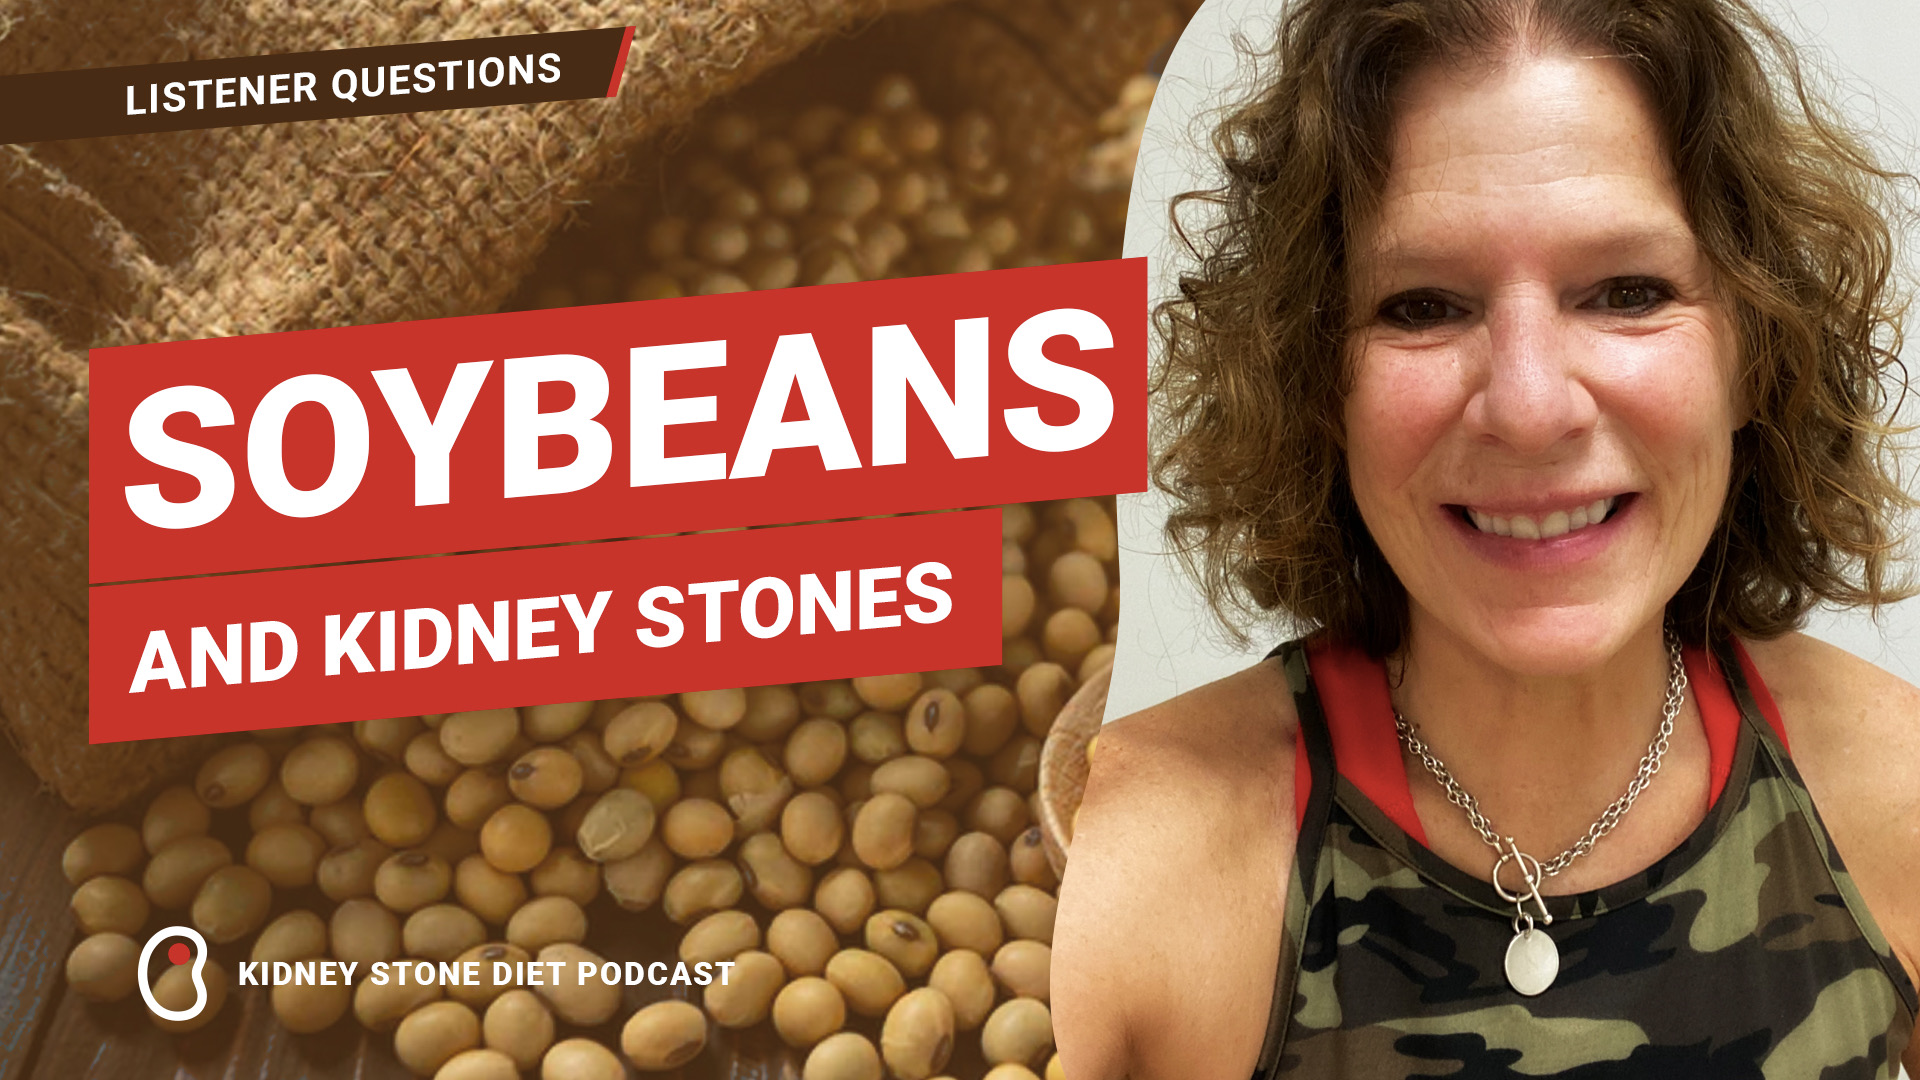 Soybeans and kidney stones